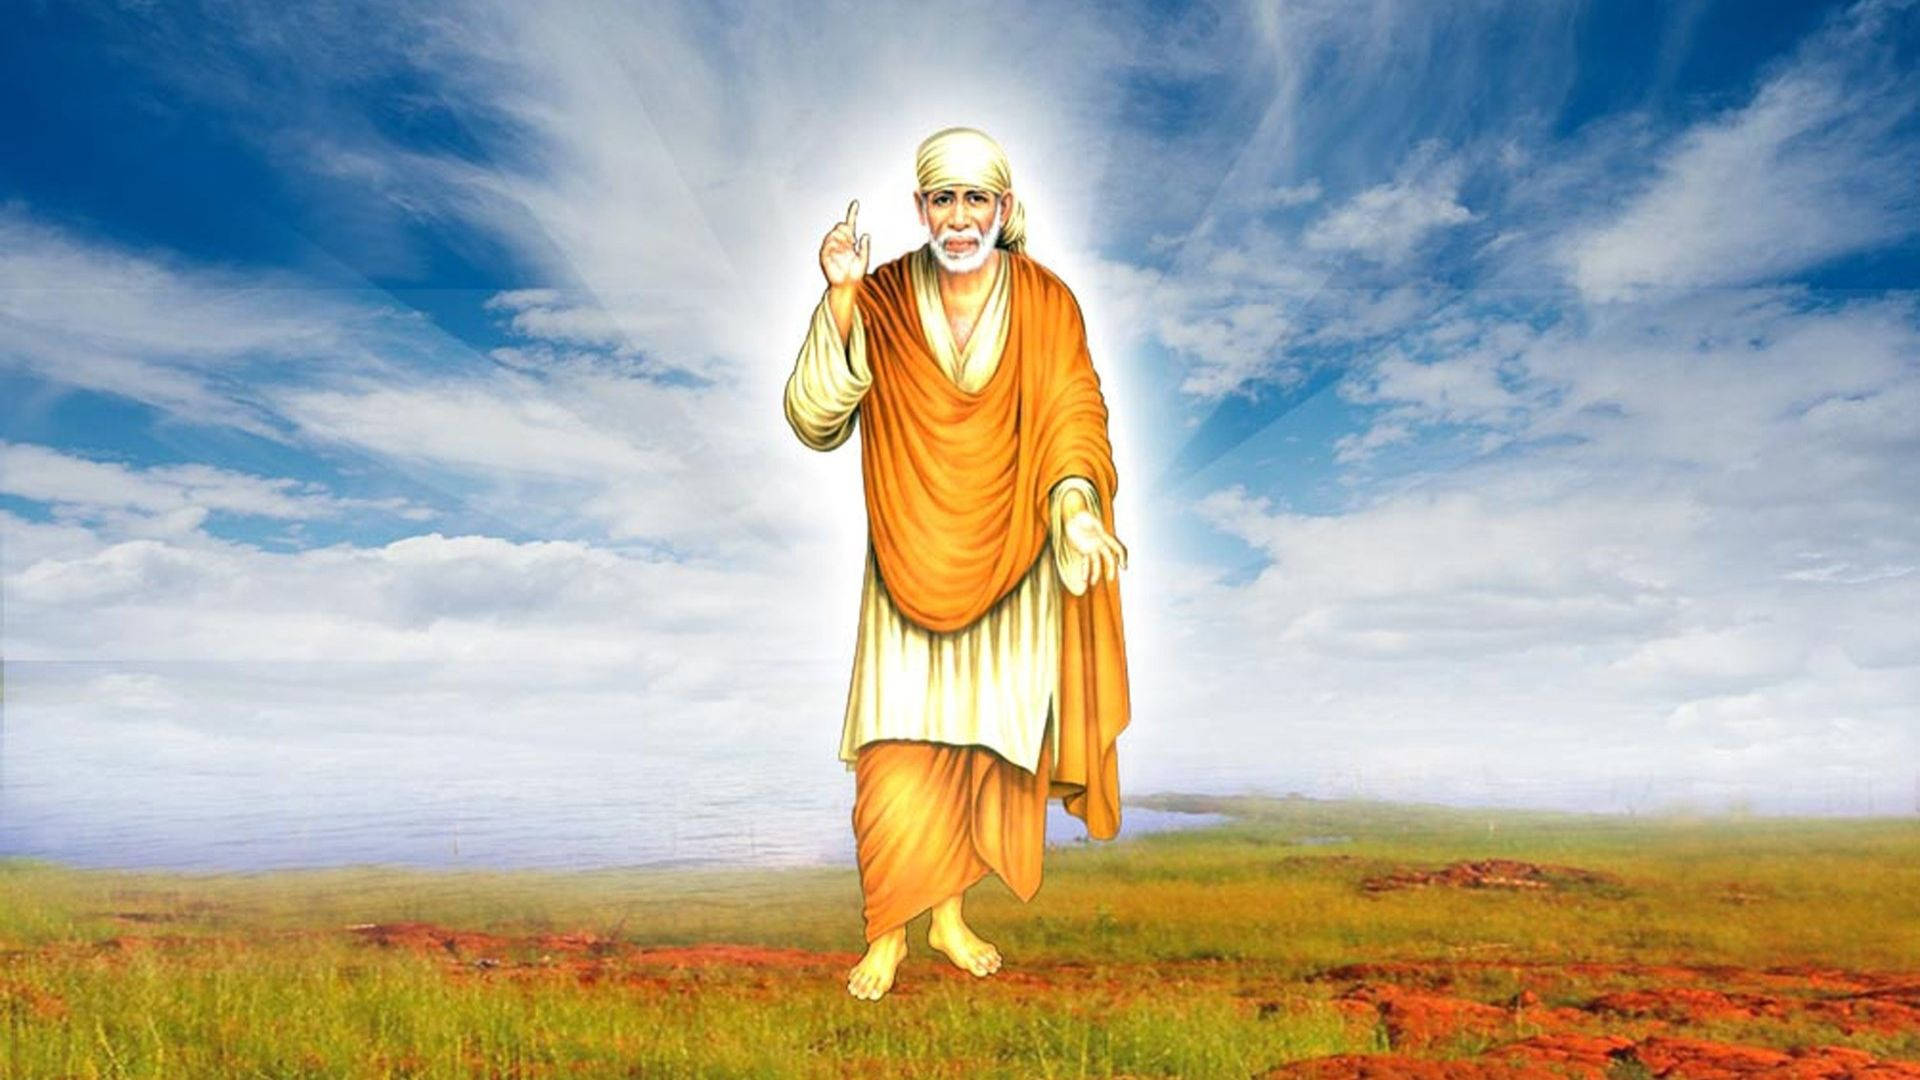 Sai Baba Hd In The Field Background